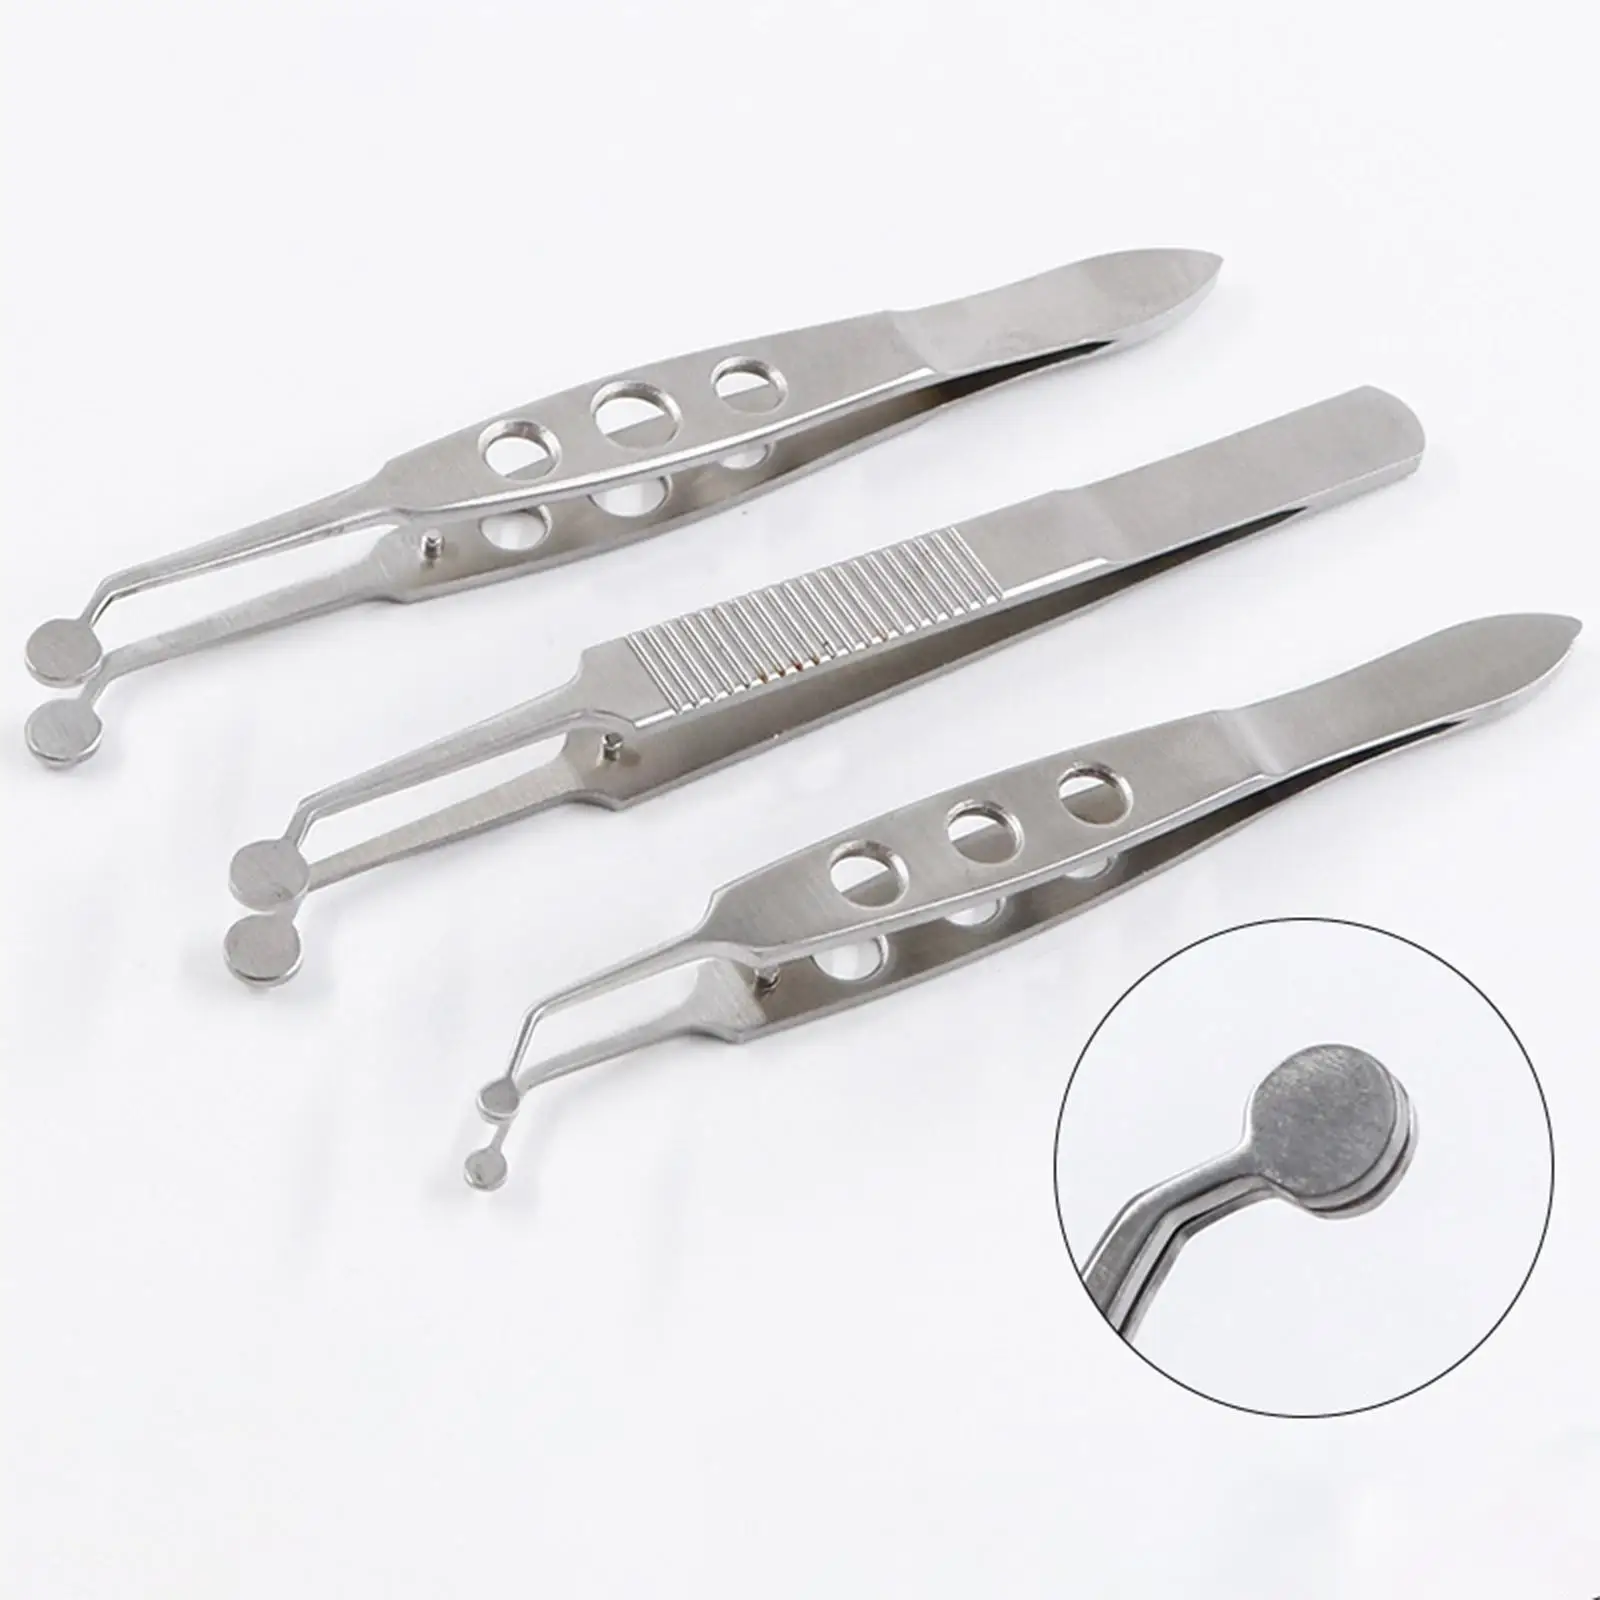 Meibomian Gland Expressor Forceps Ophthalmological Stainless Steel Clamp Tools for Palpebral Gland Massage Meibomian Flap Eyelid